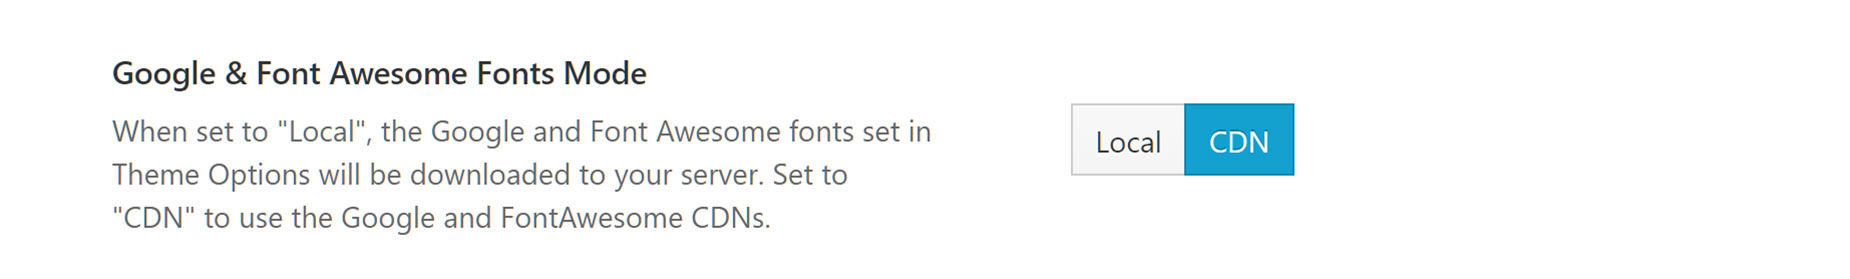 Google & Font Awesome Fonts Mode